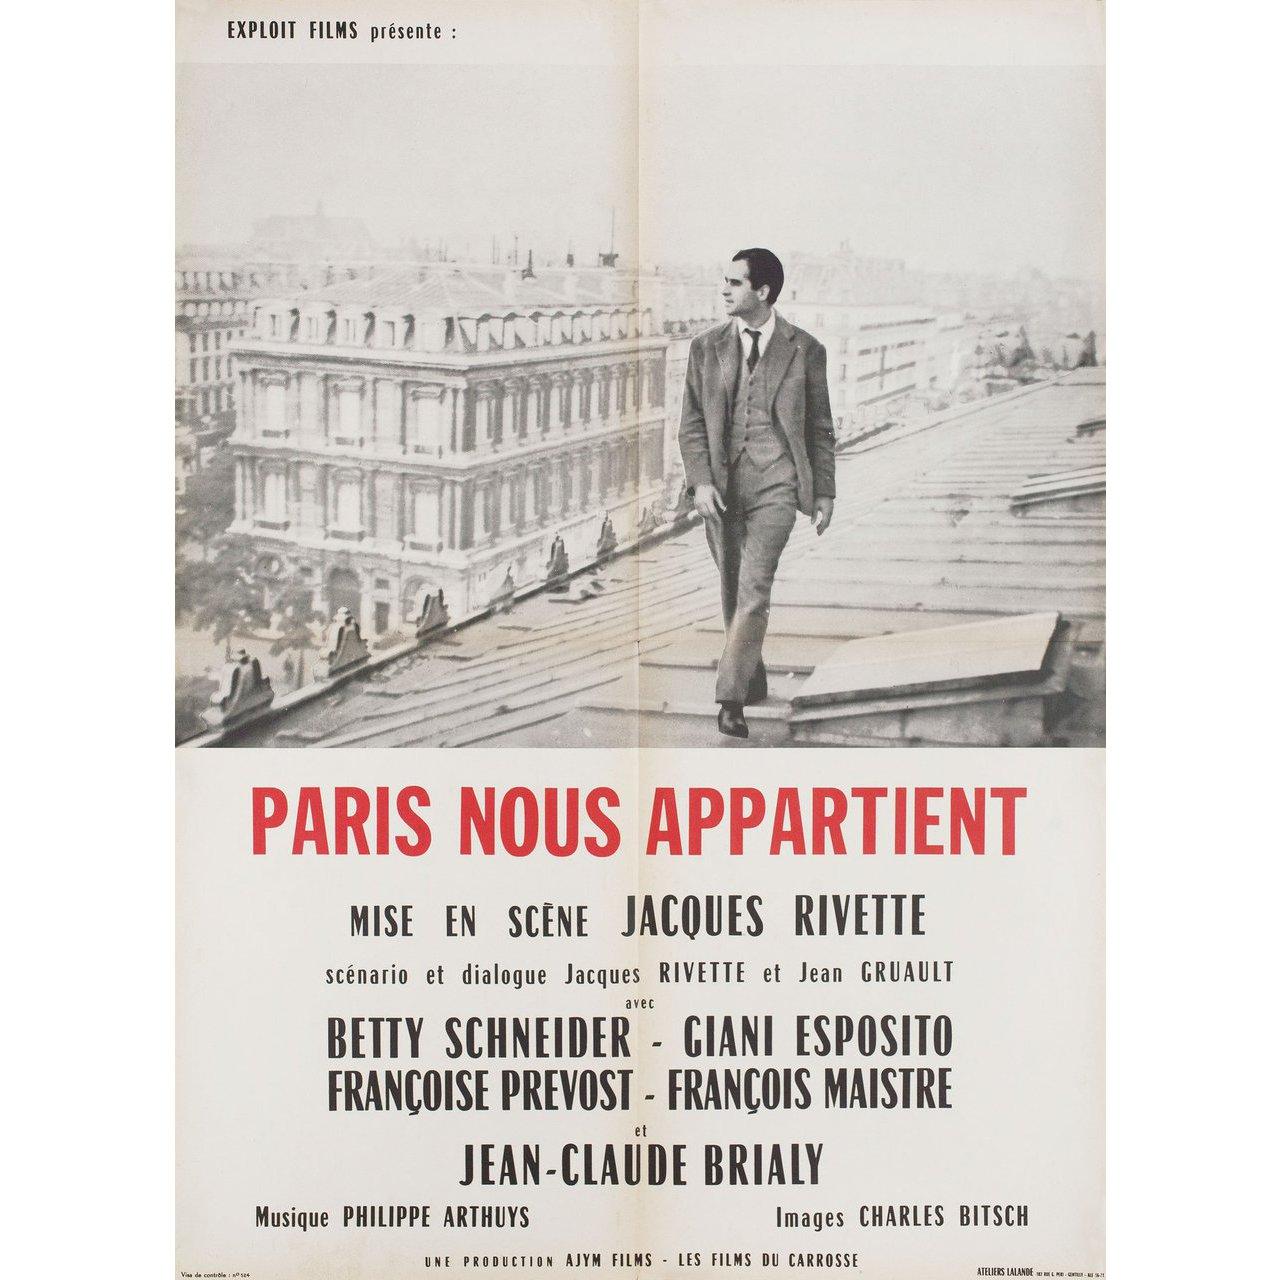 Original 1961 French moyenne poster for the film Paris Belongs to Us (Paris nous appartient) directed by Jacques Rivette with Betty Schneider / Giani Esposito / Francoise Prevost / Daniel Crohem. Very good-fine condition, folded. Many original